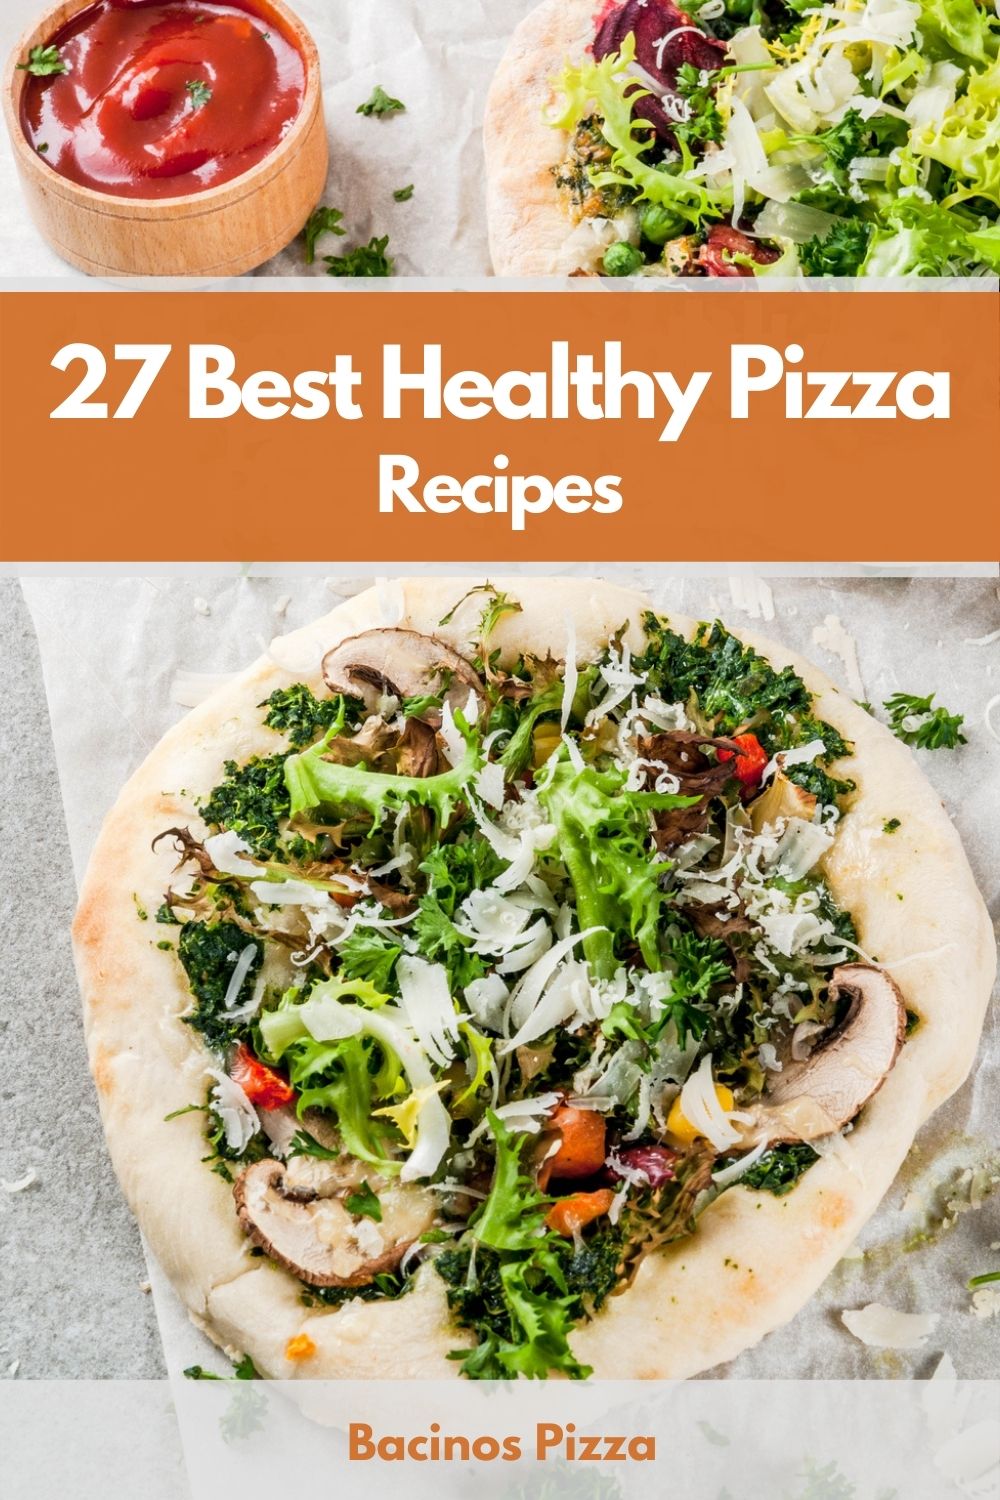 27 Best Healthy Pizza Recipes pin